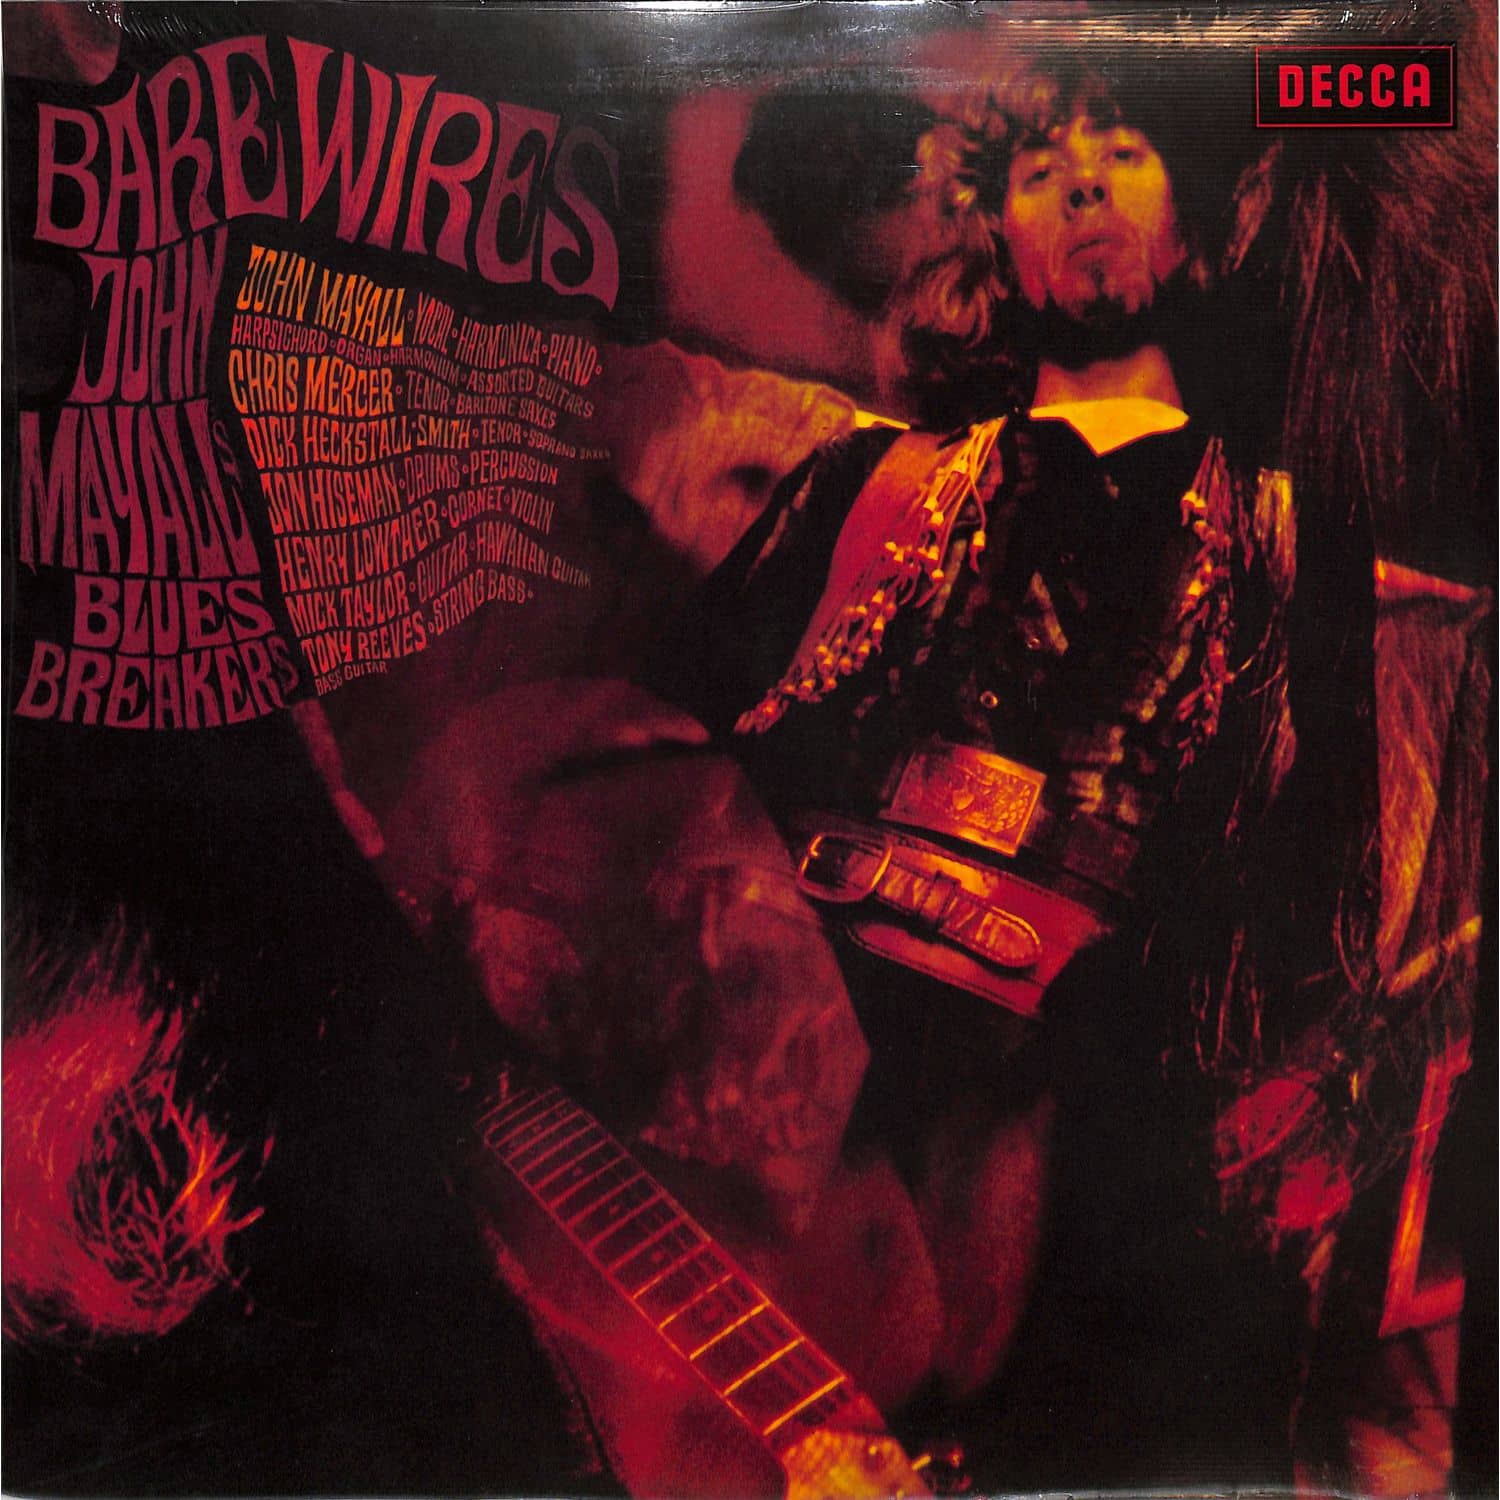 John Mayall & The Bluesbreakers - BARE WIRES 